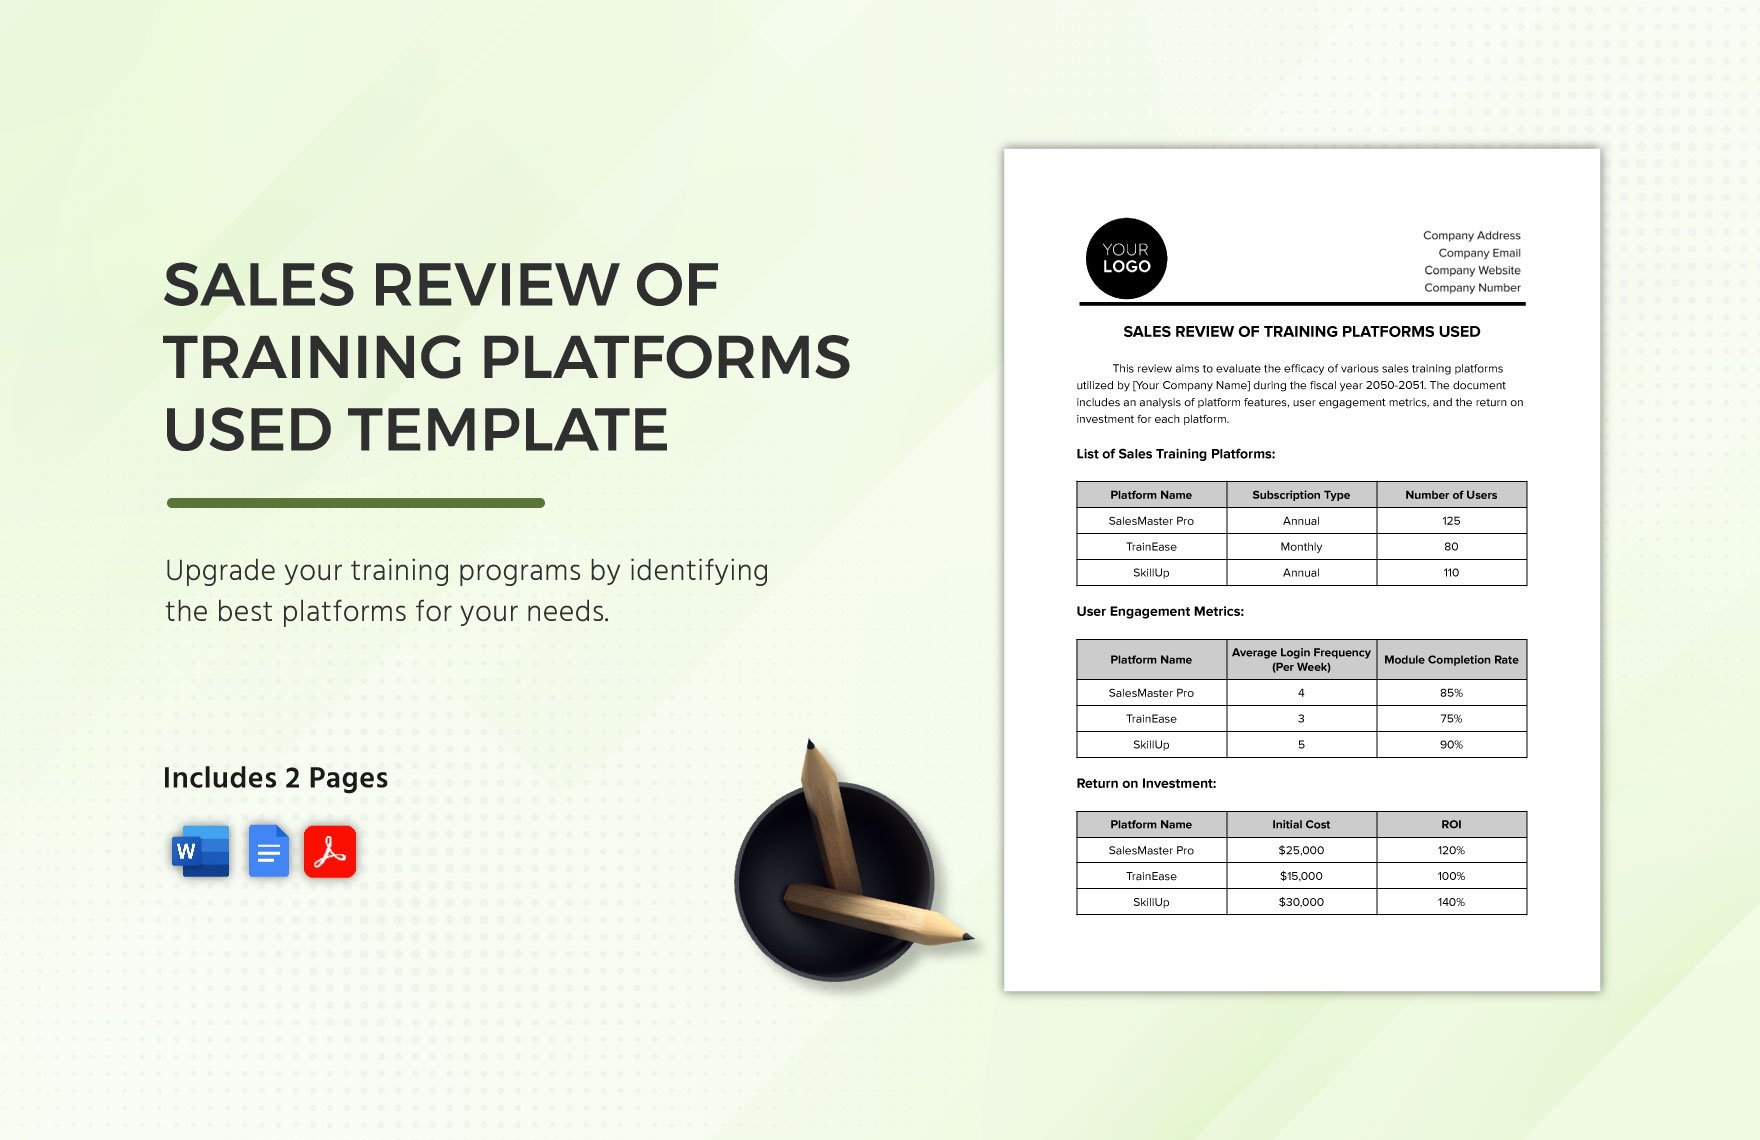 Sales Review of Training Platforms Used Template in Word, Google Docs, PDF